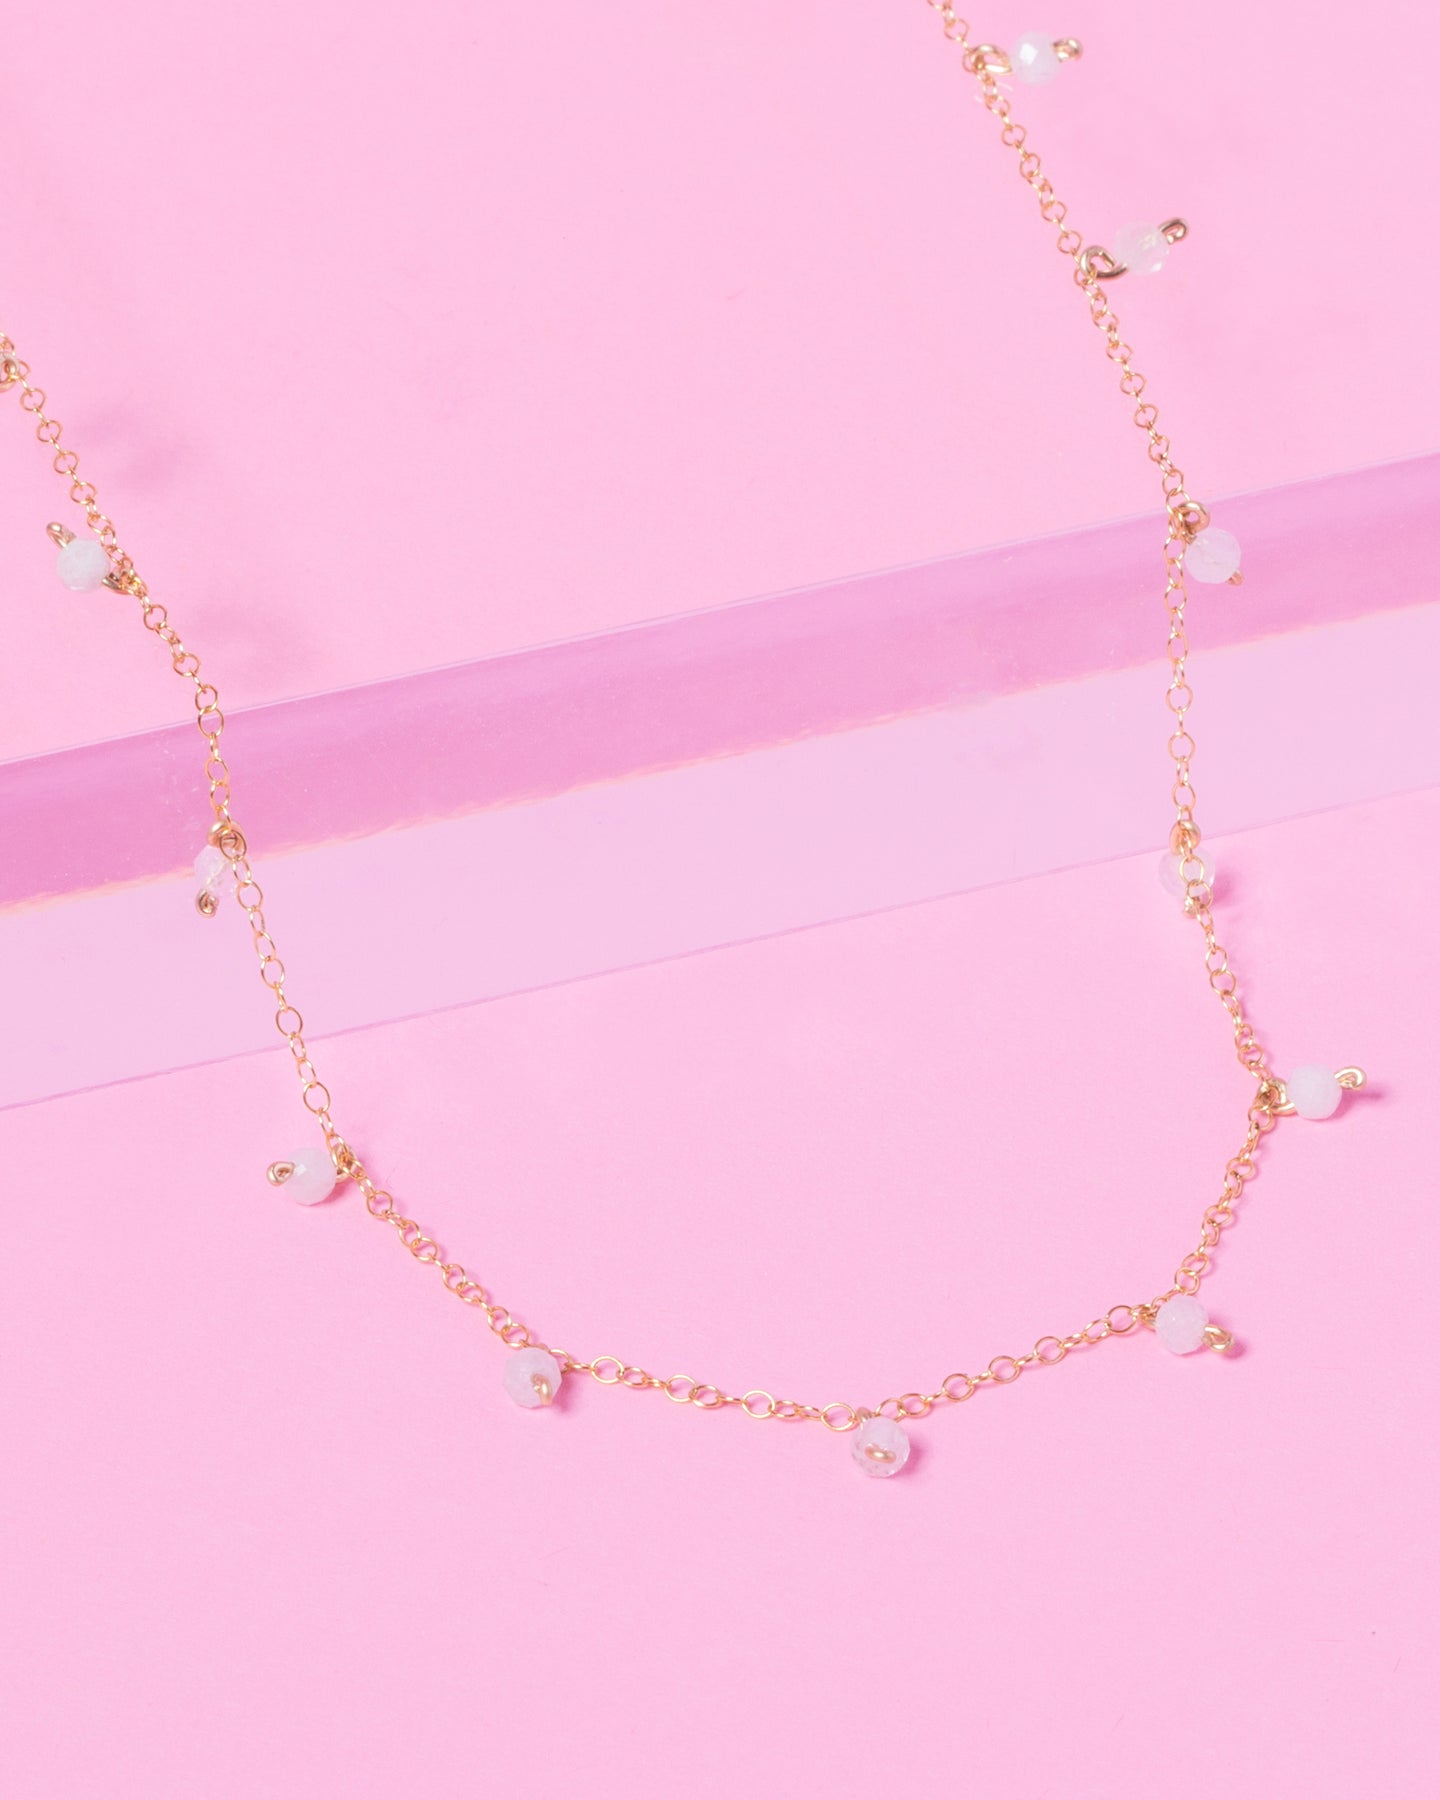 MORGANITE DAINTY 14K GOLD FILLED NECKLACE